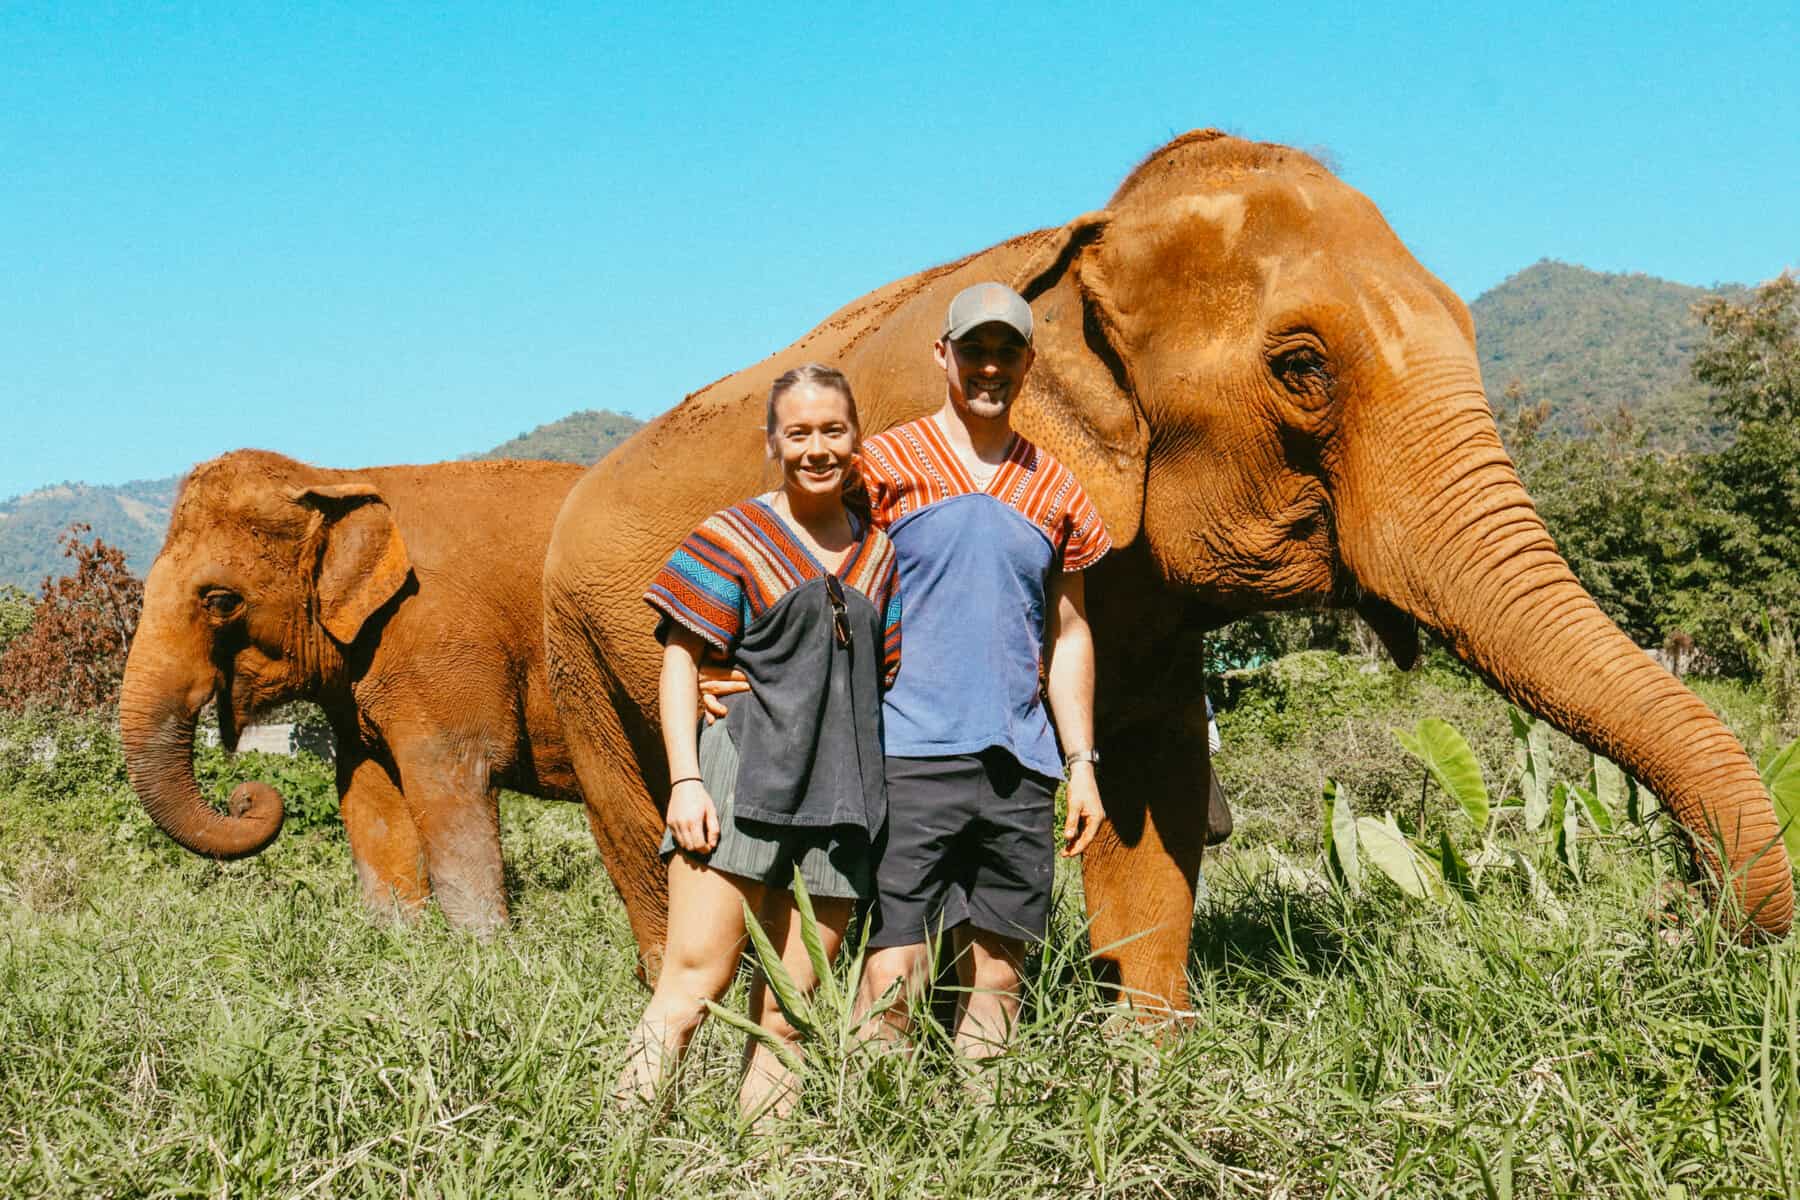 Abby and Sam with elephants in Thailand. This trip is one of the reasons they were inspired to write a couples travel blog.